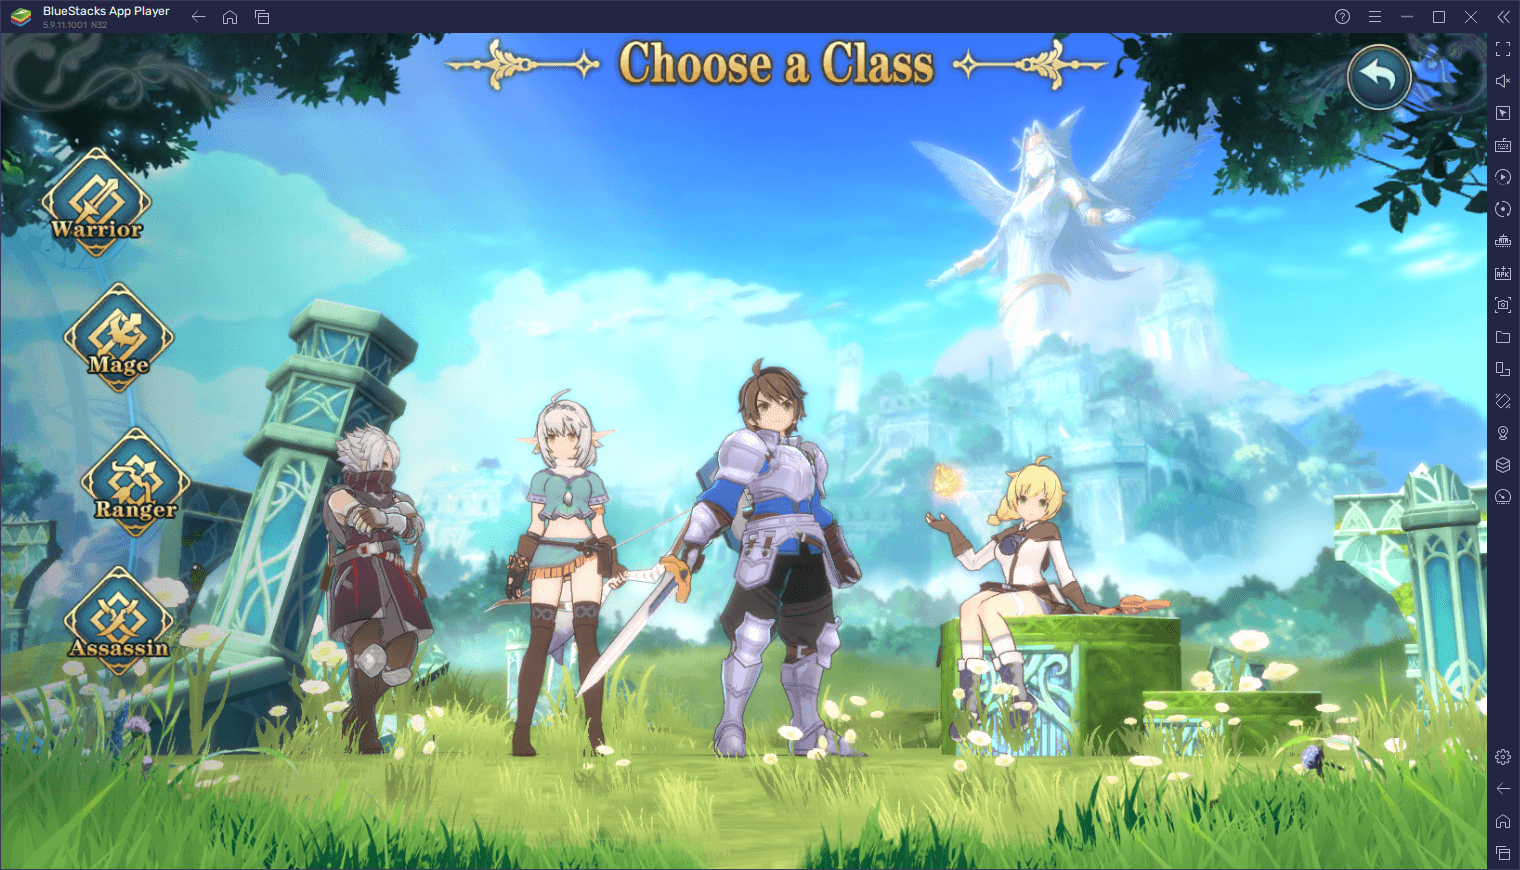 Ys Online: The Ark of Napishtim Class Guide - Which Class is the Best For You?